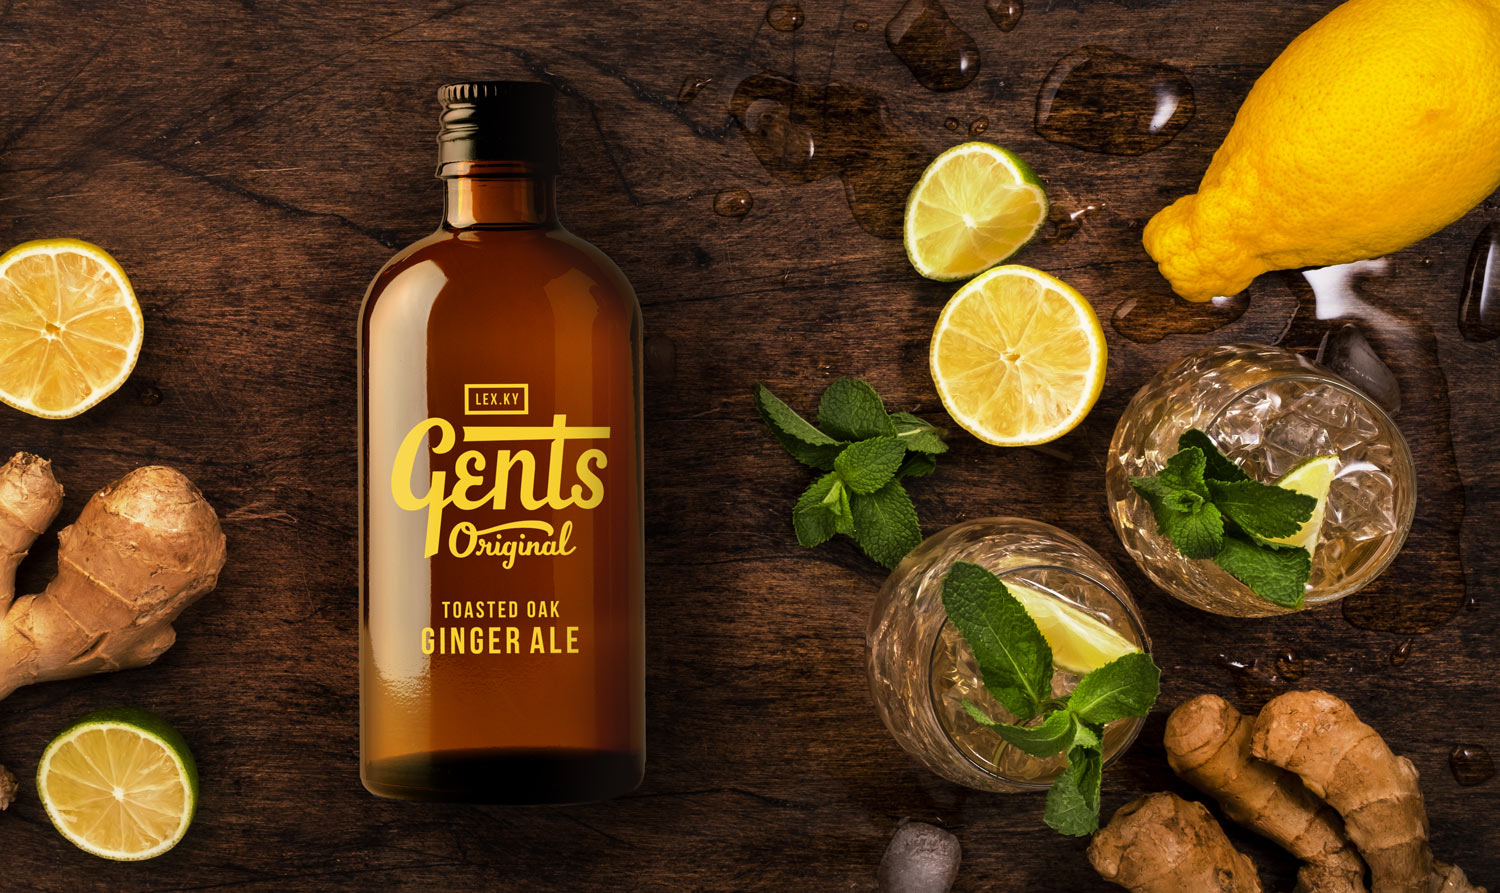 Gents ginger ale with ginger and lemon ingredients